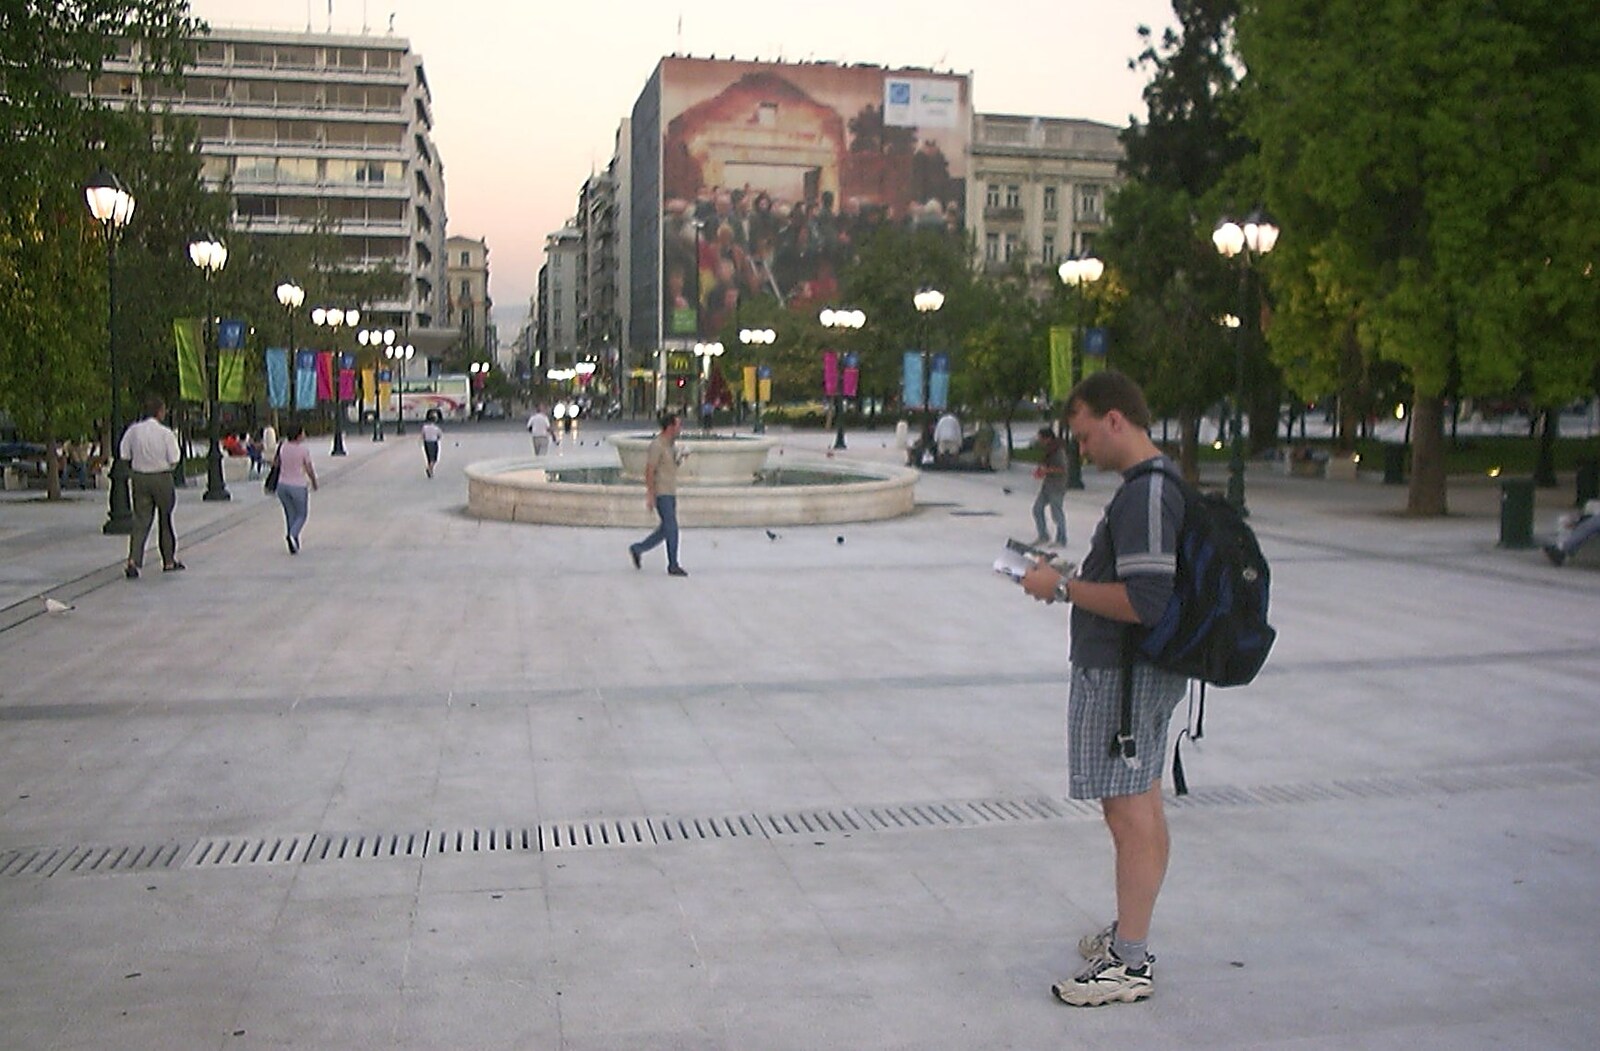 A Postcard From Athens: A Day Trip to the Olympics, Greece - 19th August 2004: Hanging around by the parliament building